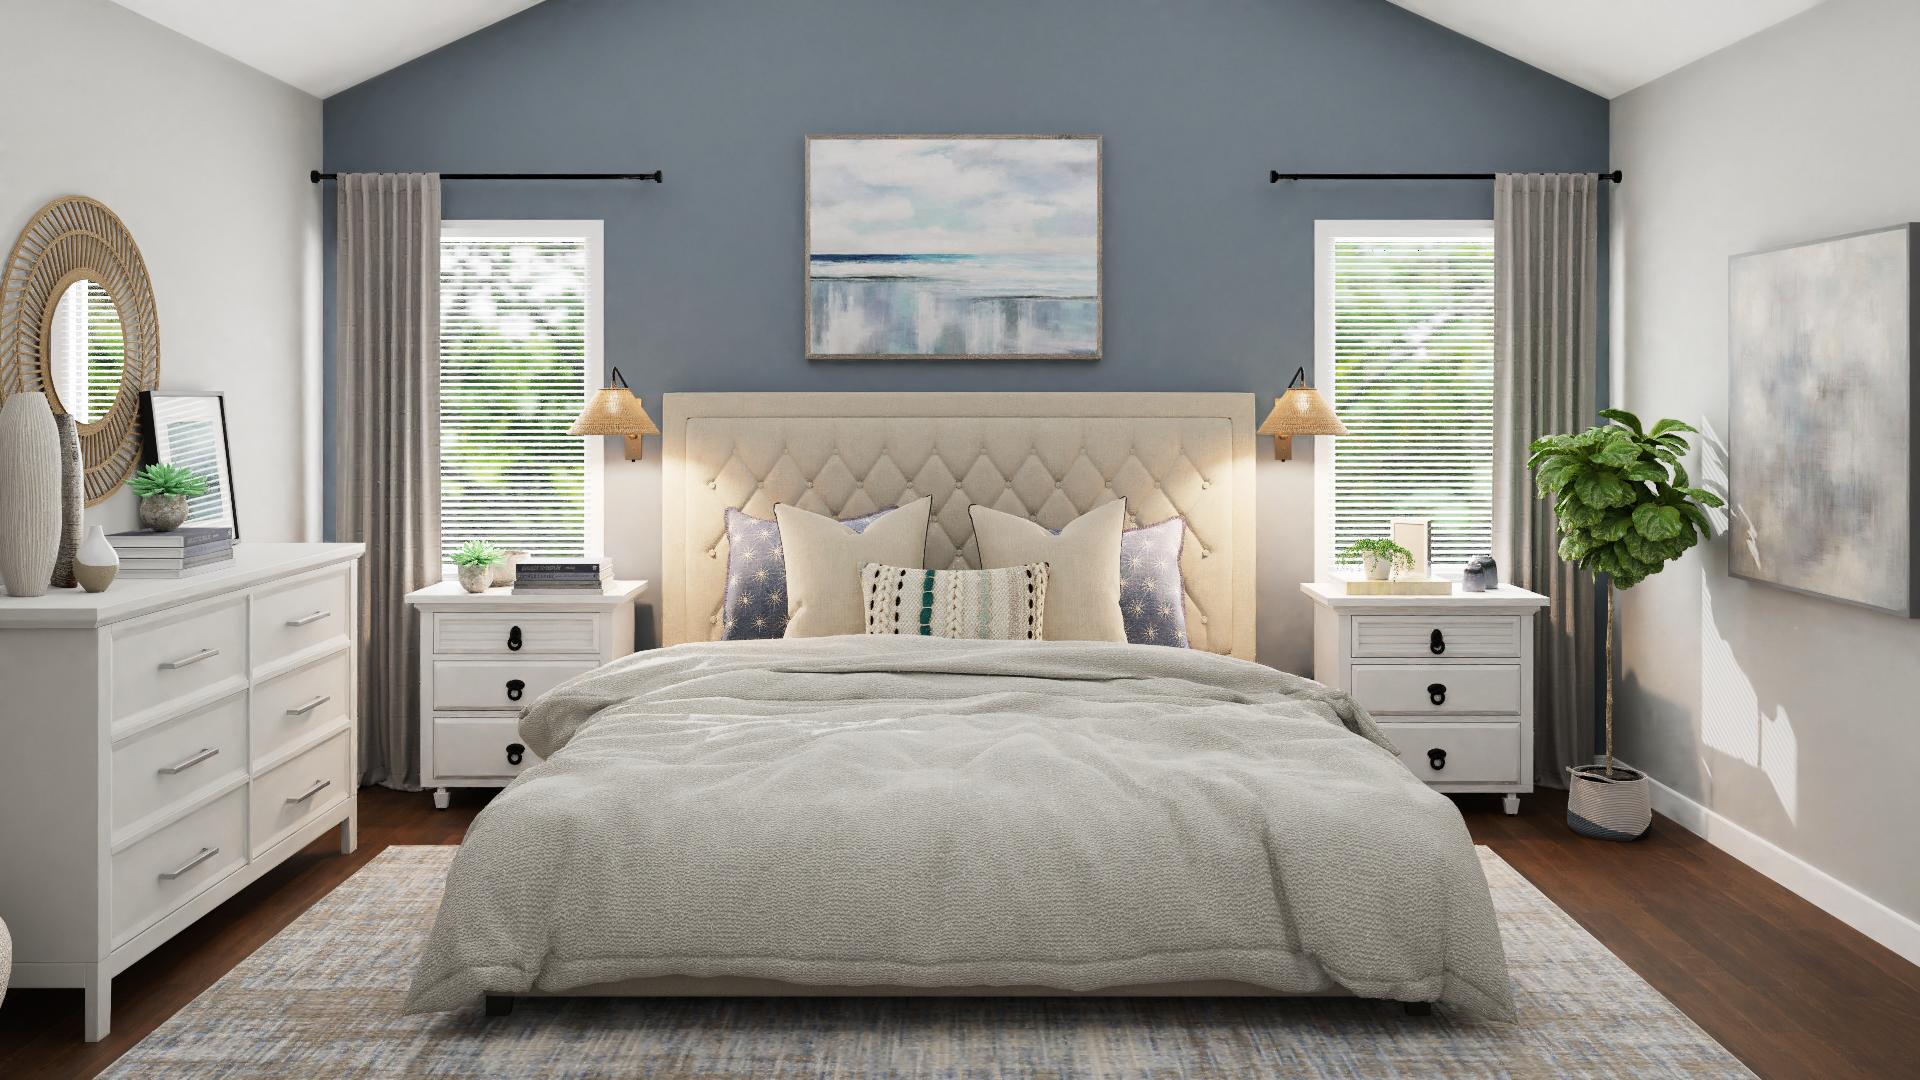 A Transitional Coastal Bedroom In Oceanic Hues